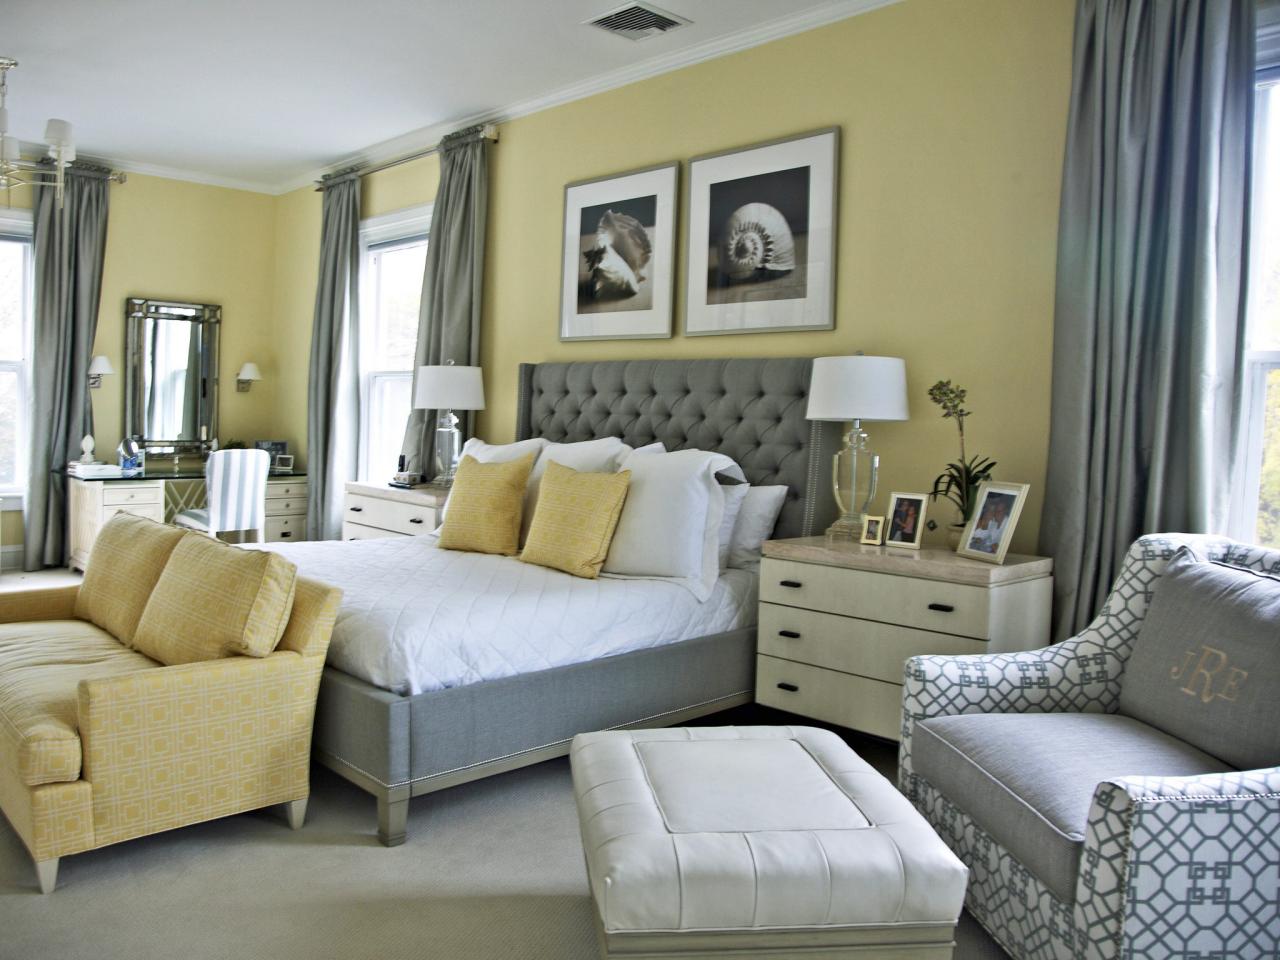 How to choose the best color schemes for bedrooms ?